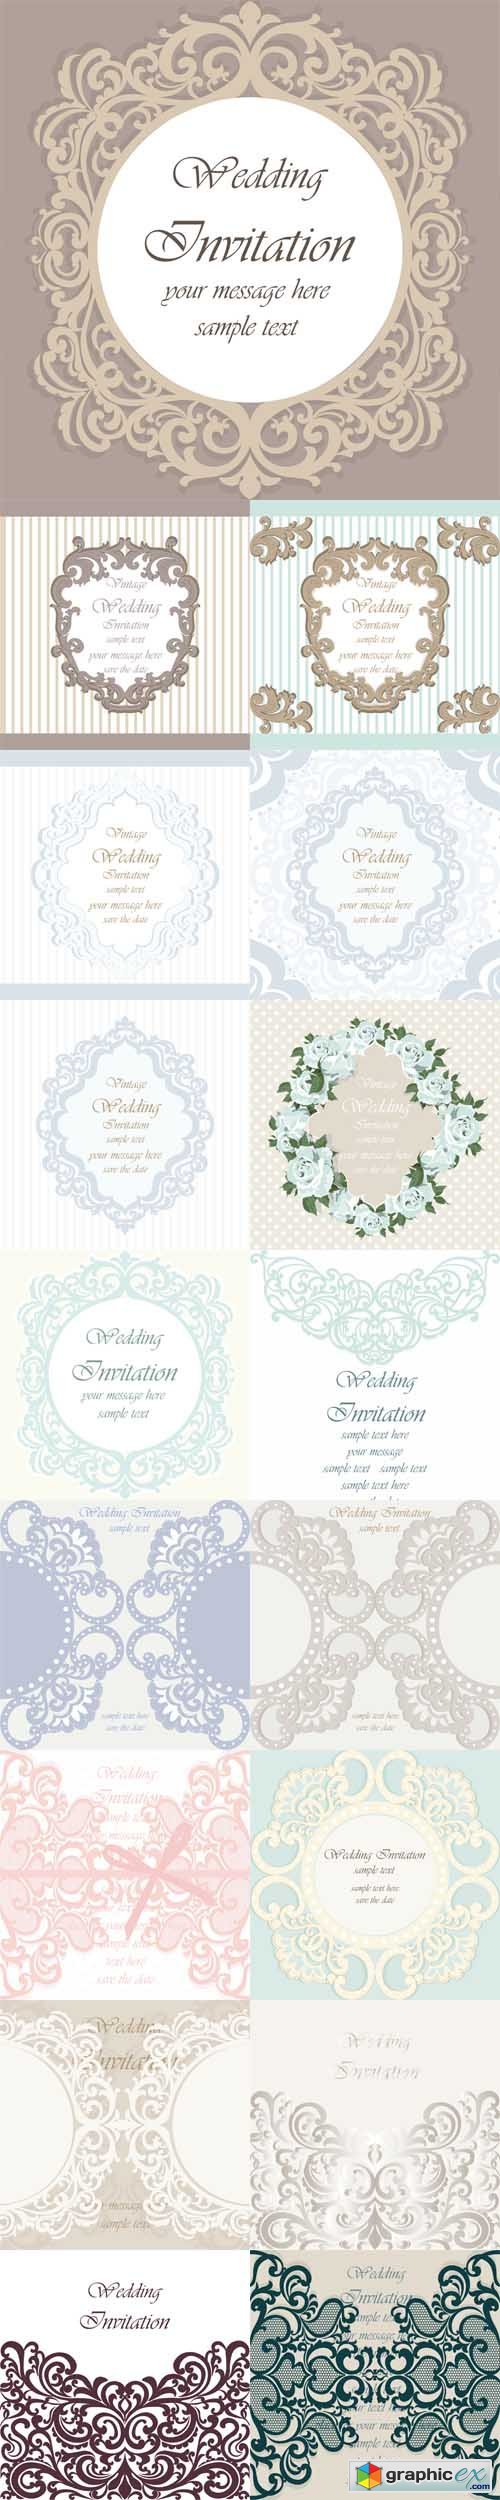 Wedding Invitation Card with Lace Ornament